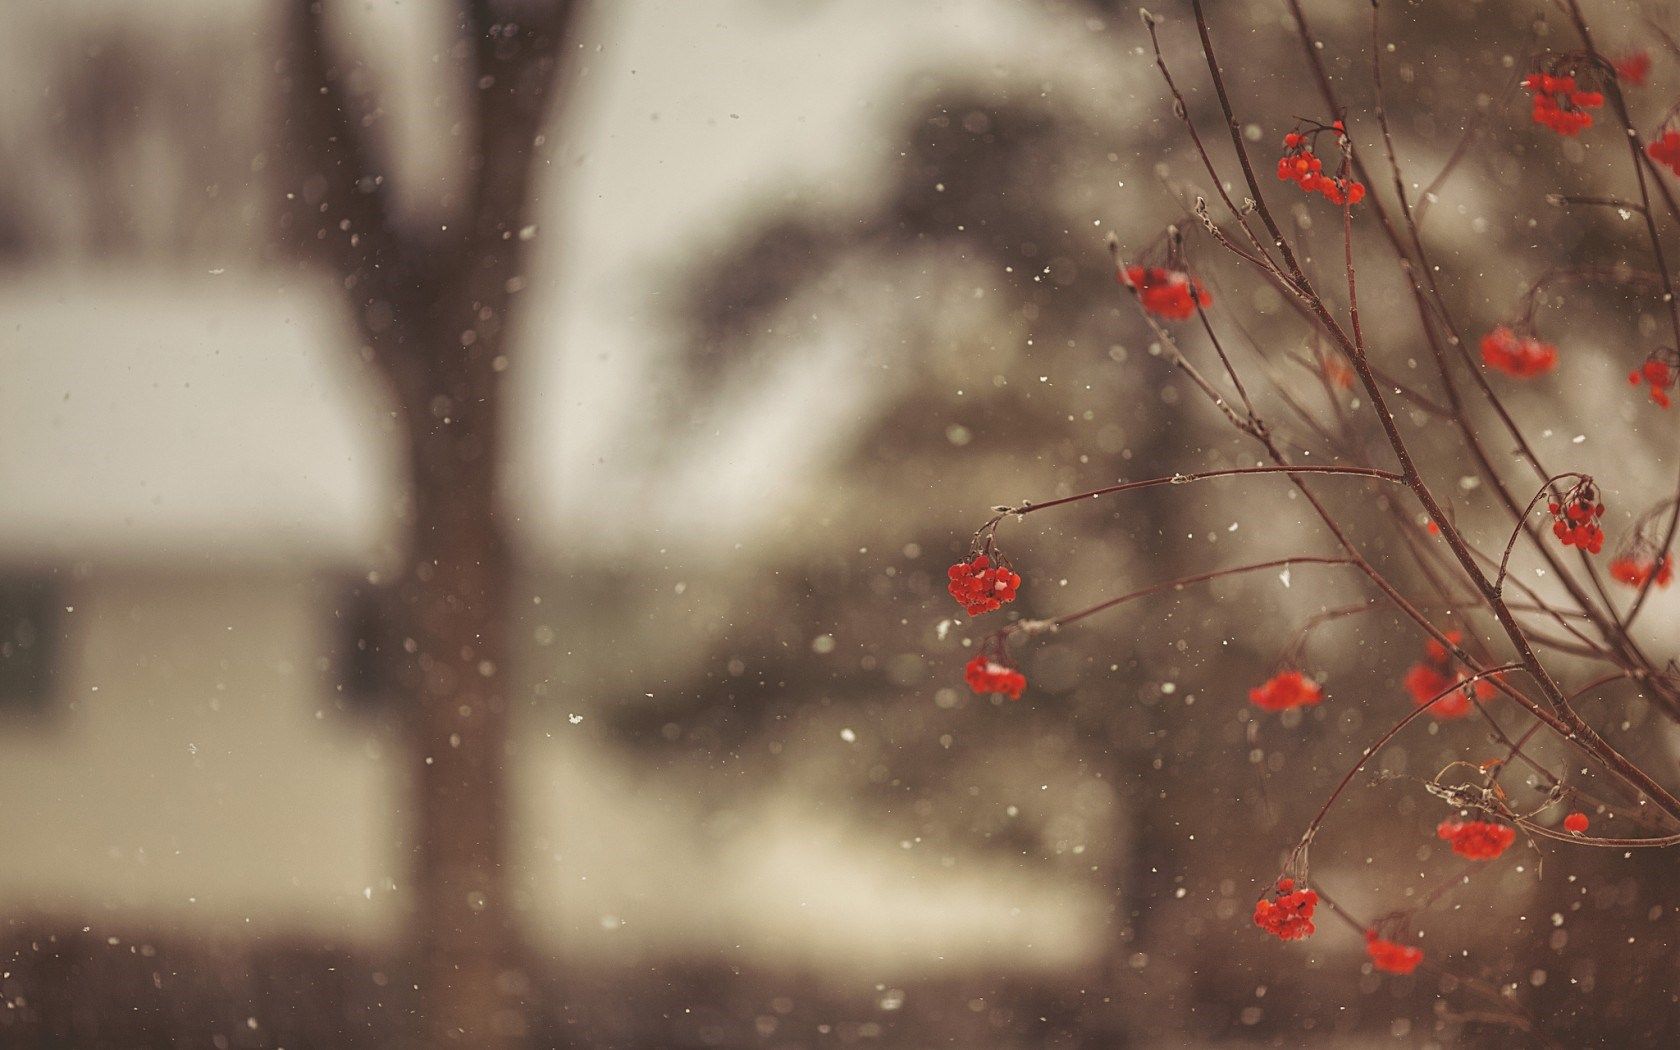 HD wallpaper, Ash, Winter, Mountain, Berries, Red, Snowflakes, Branches